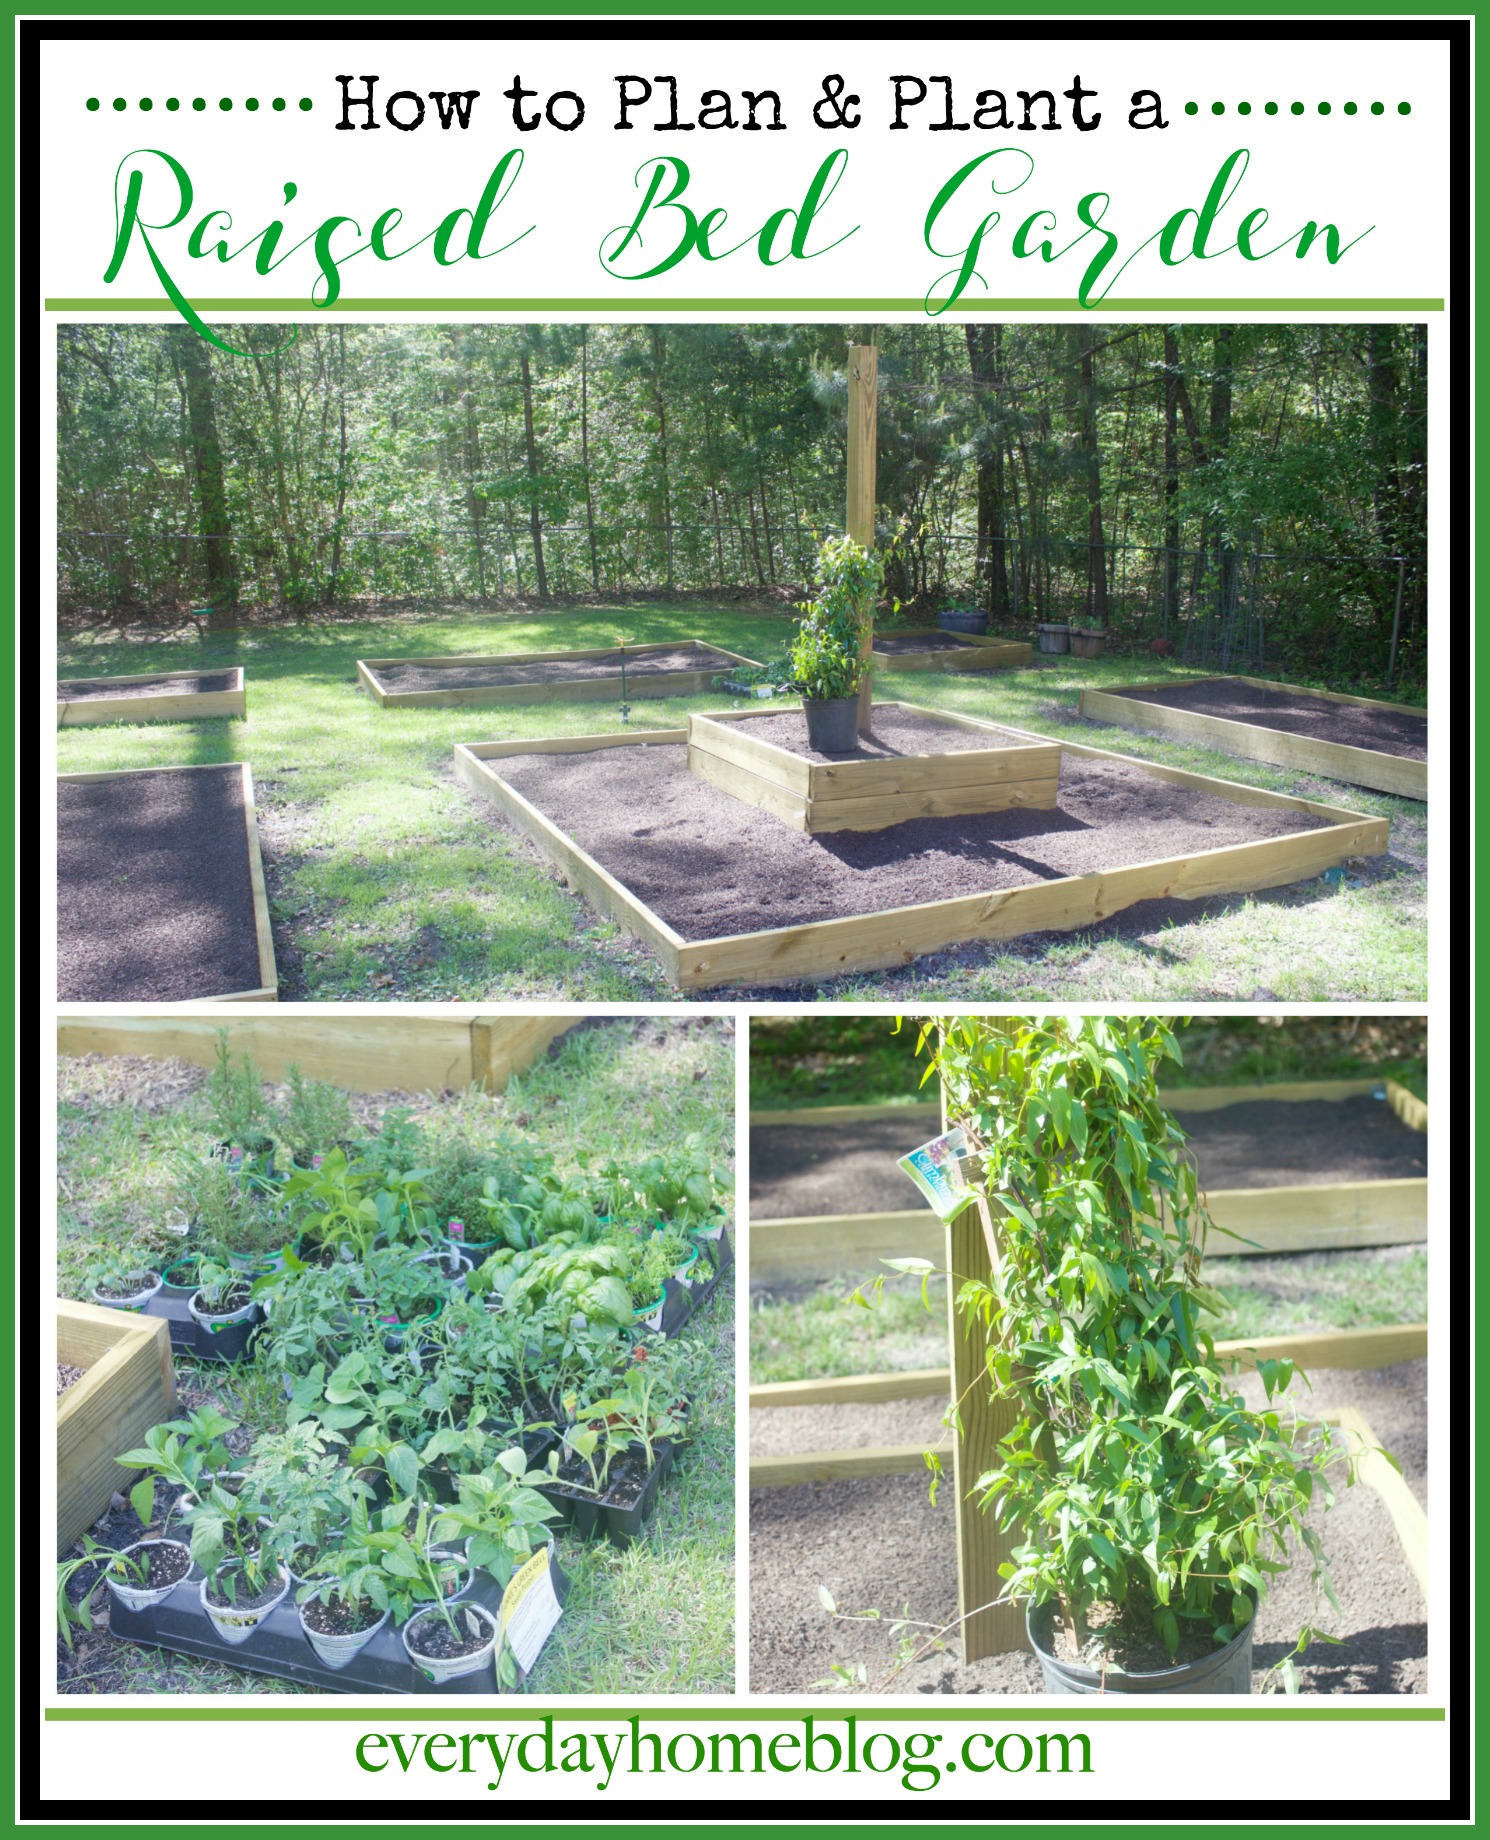 How to Plan & Plant a Raised Bed Garden | The Everyday Home